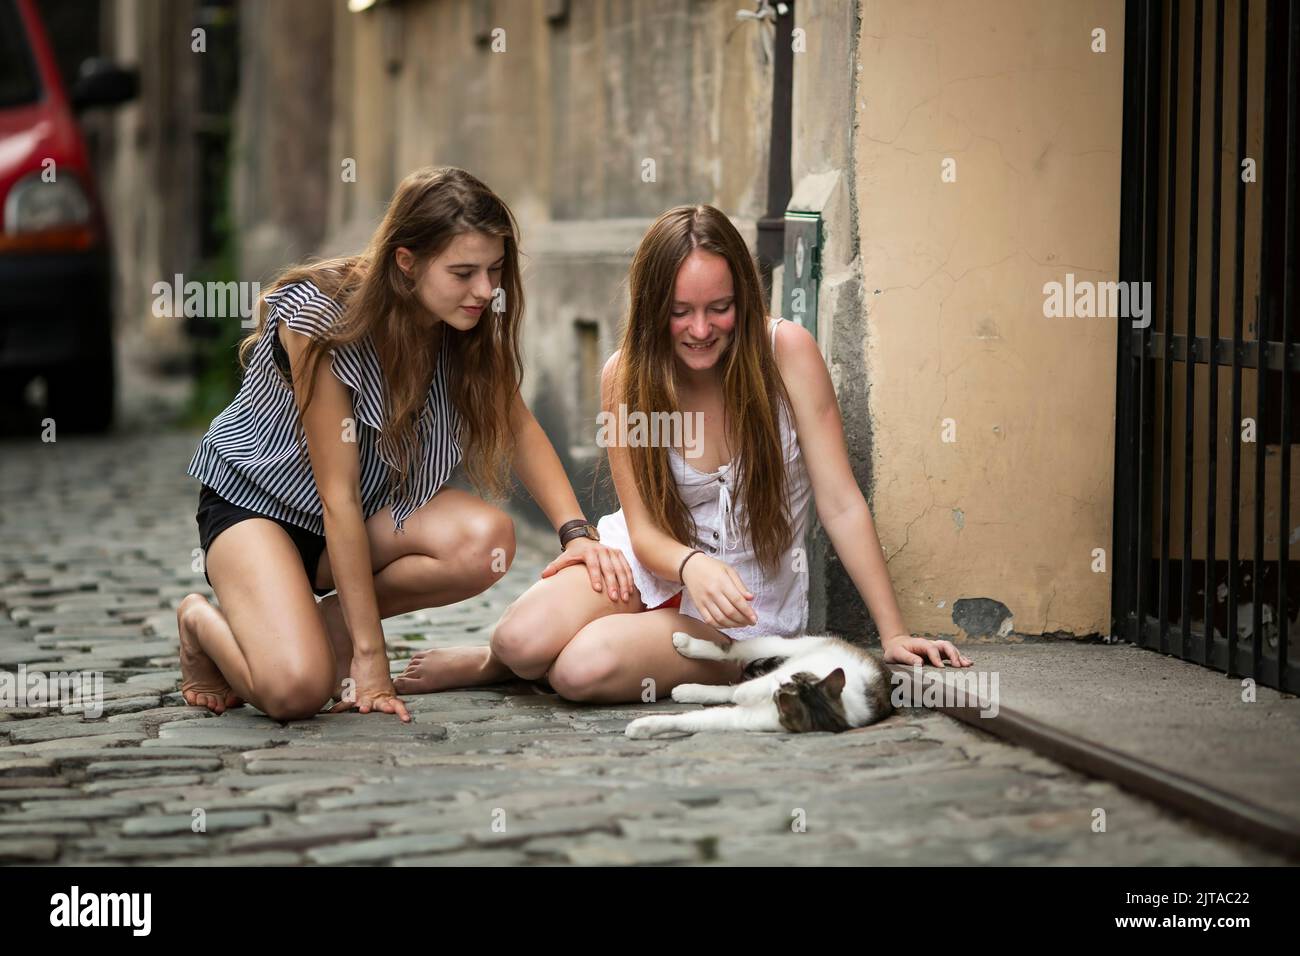 Two pretty girls playing with a cat in the street of the old town. Stock Photo